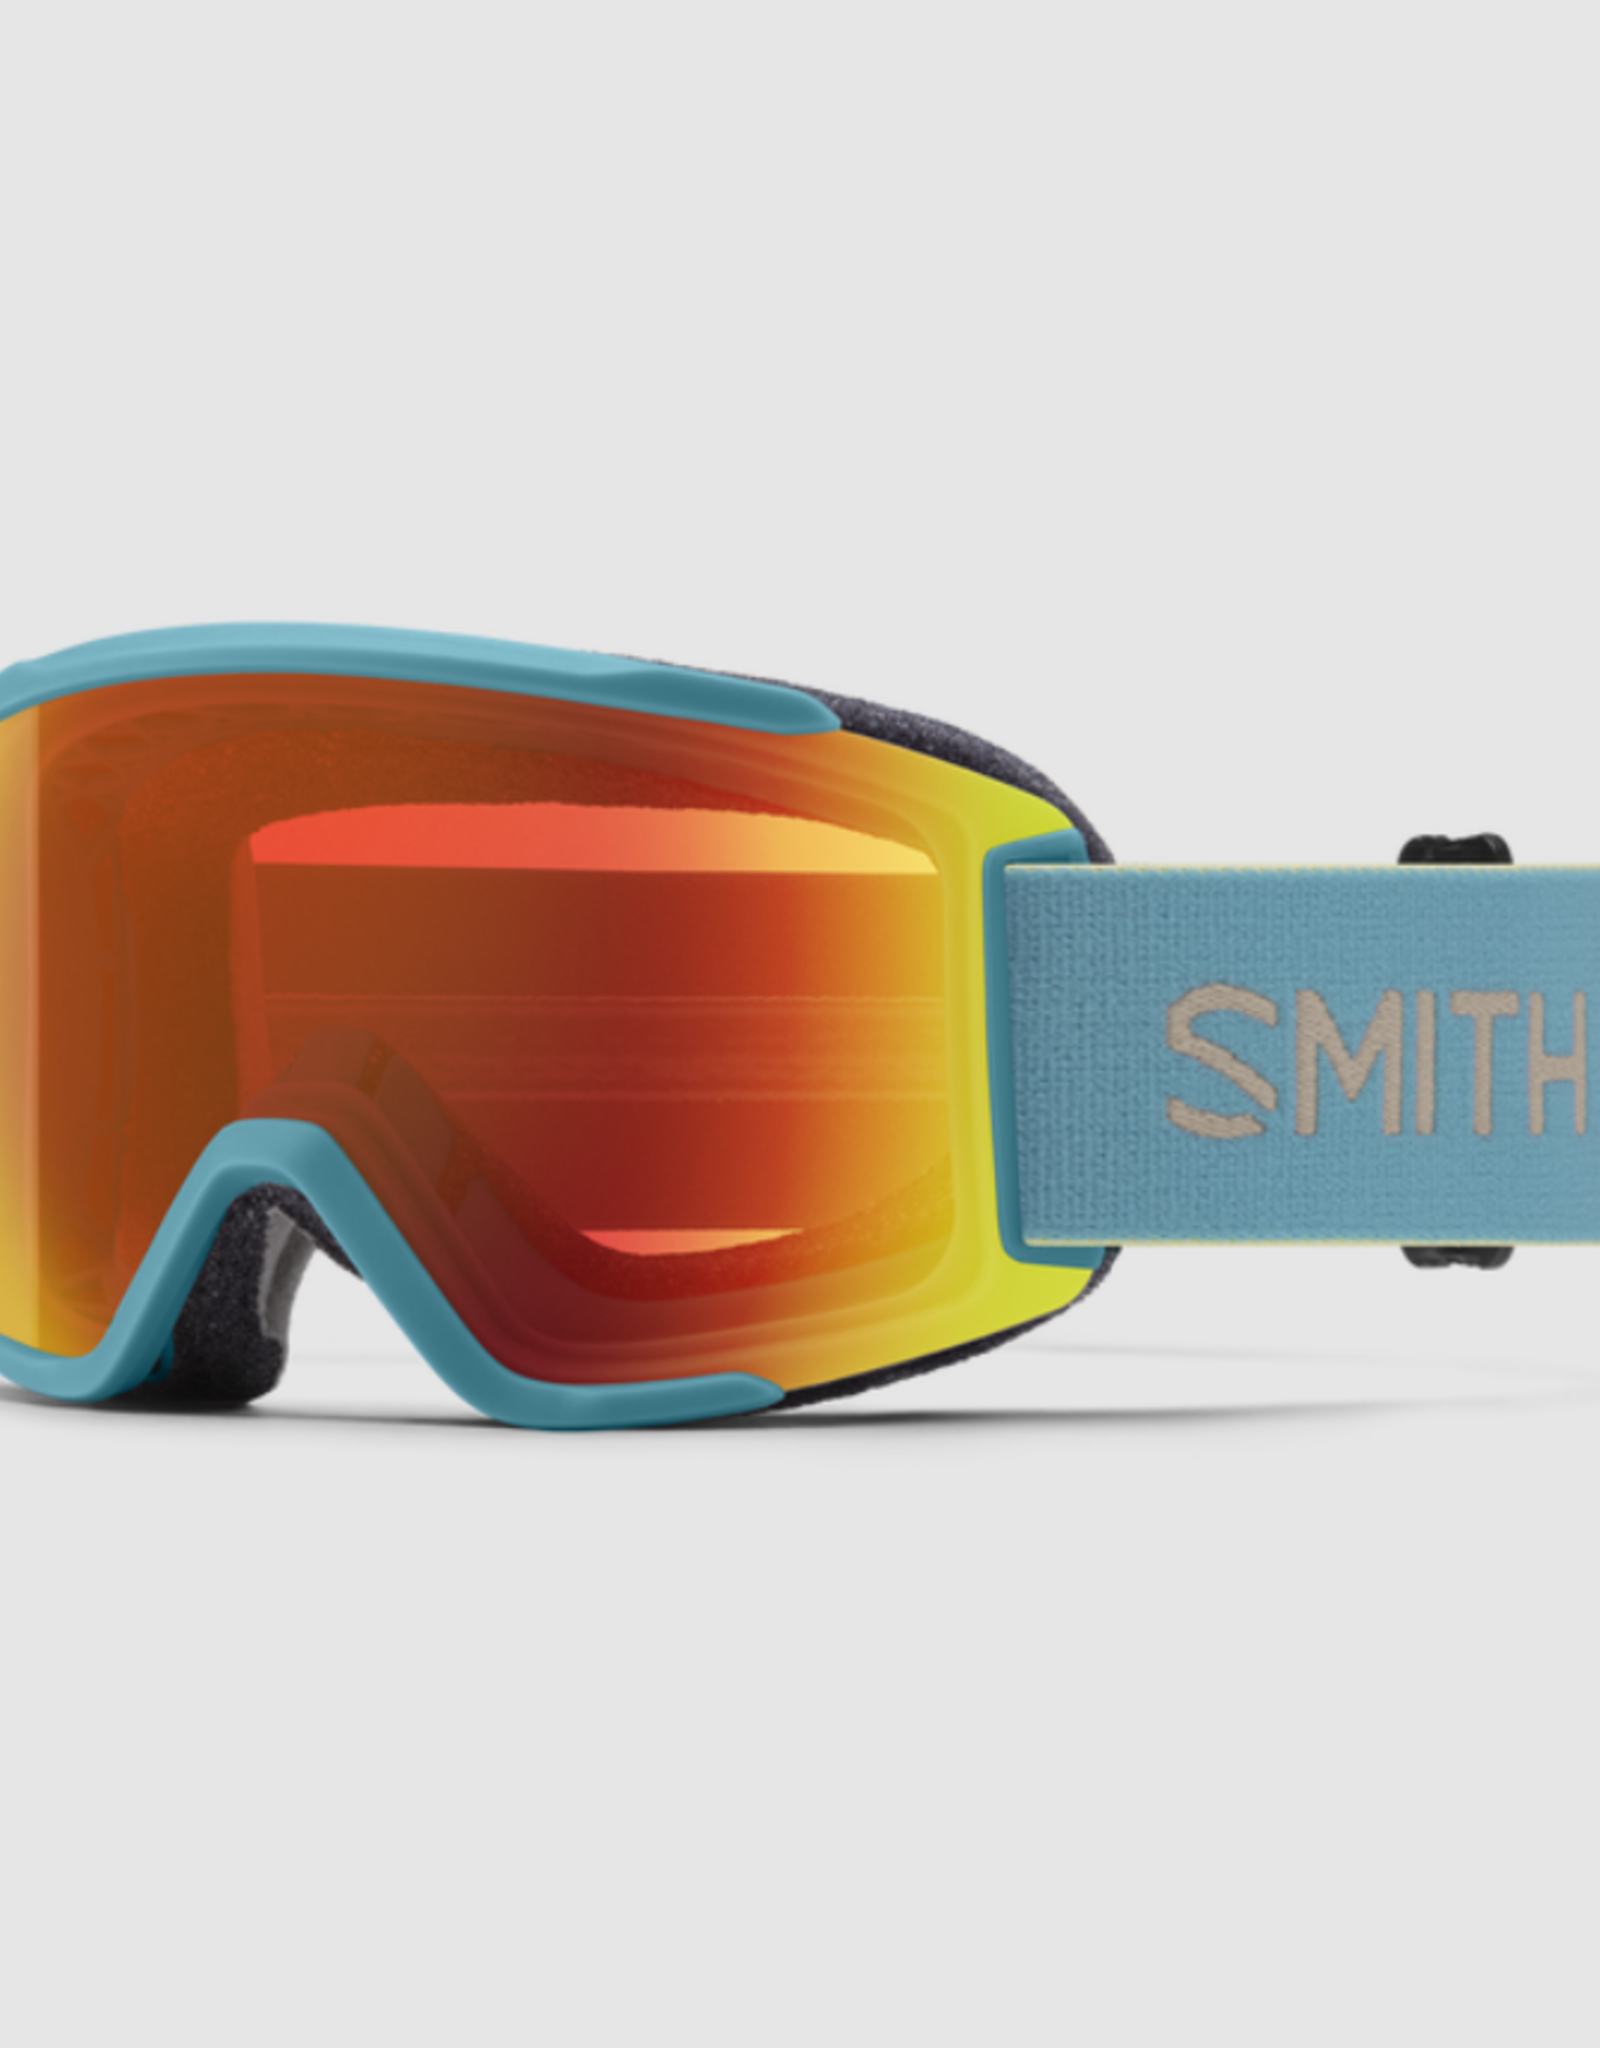 Smith Optics Smith - SQUAD S - Storm Colourblock w/ CP Everyday RED Mirror + Clear